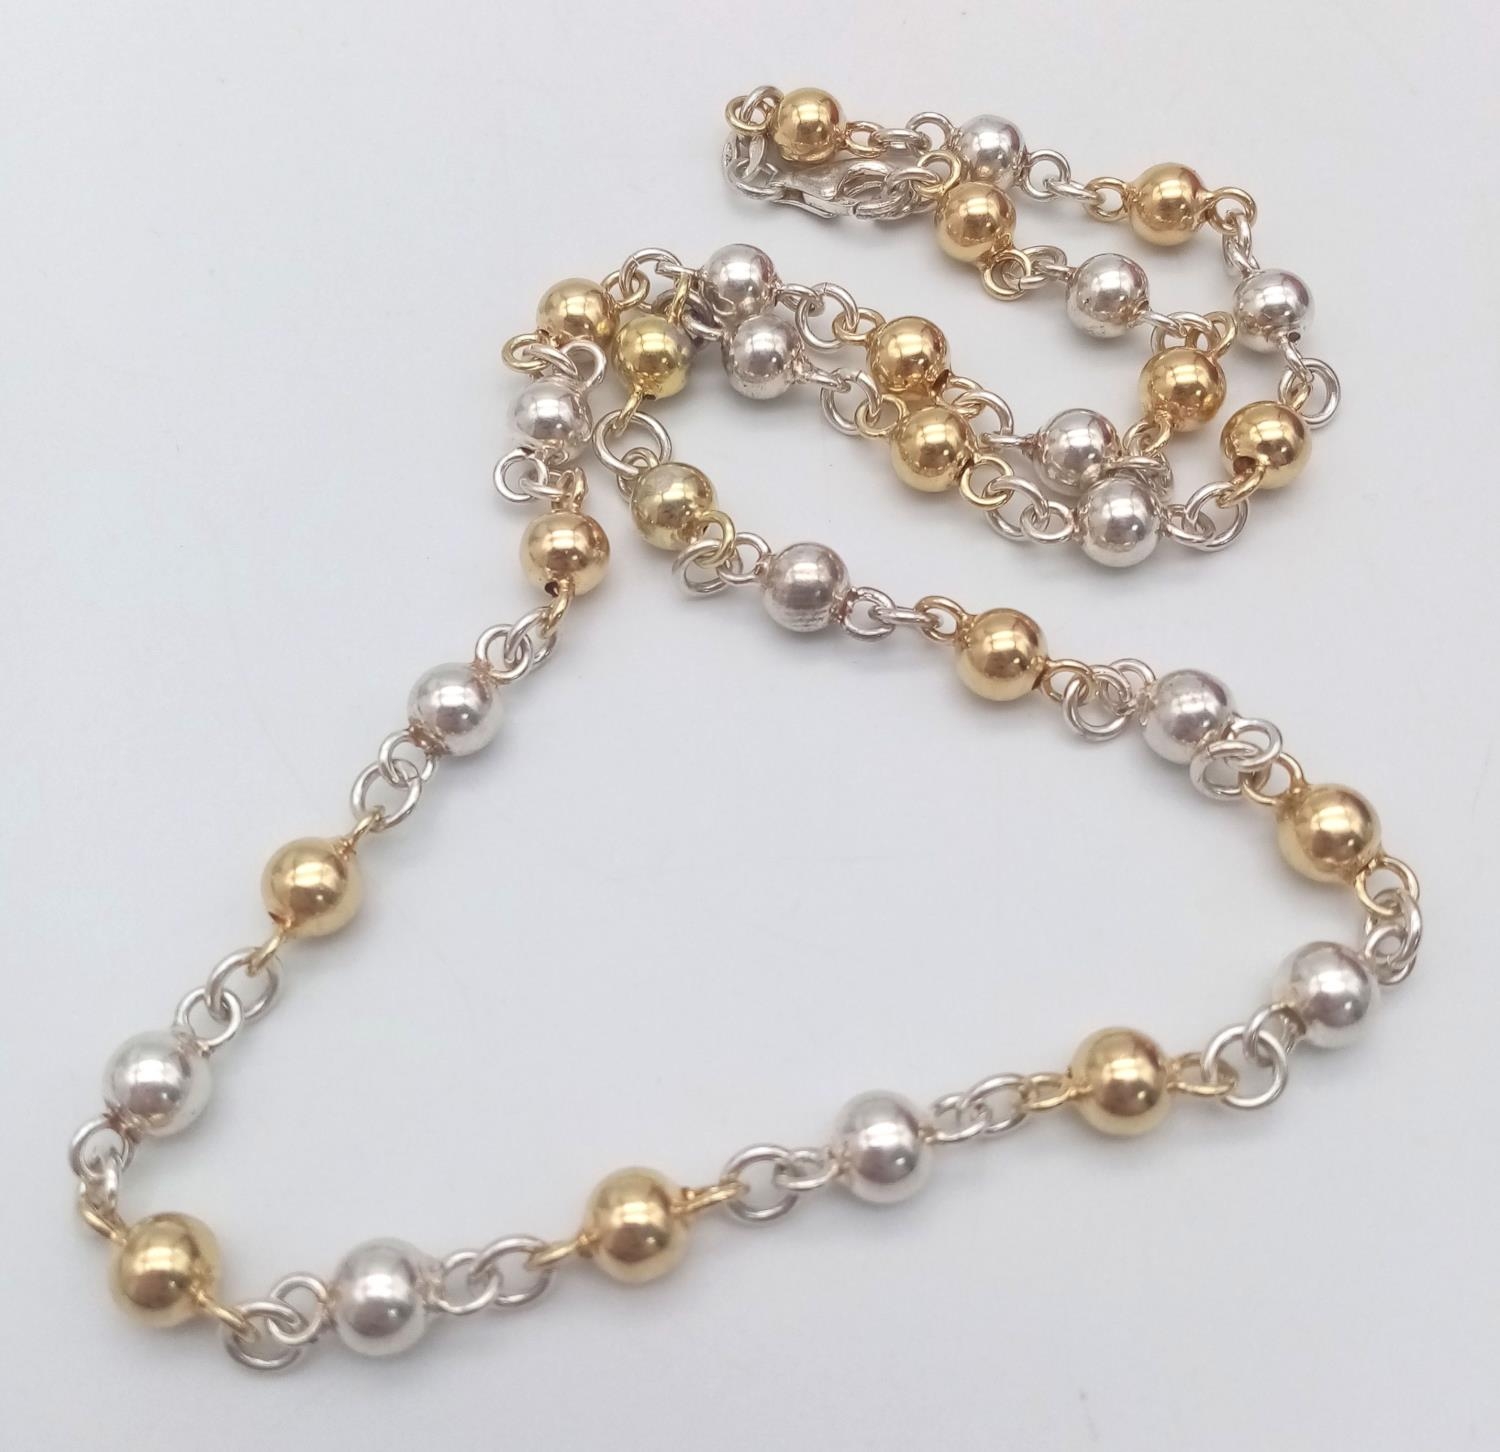 A 925 Silver and Gilded Bauble Necklace - 44cm. 19.5g - Image 3 of 4